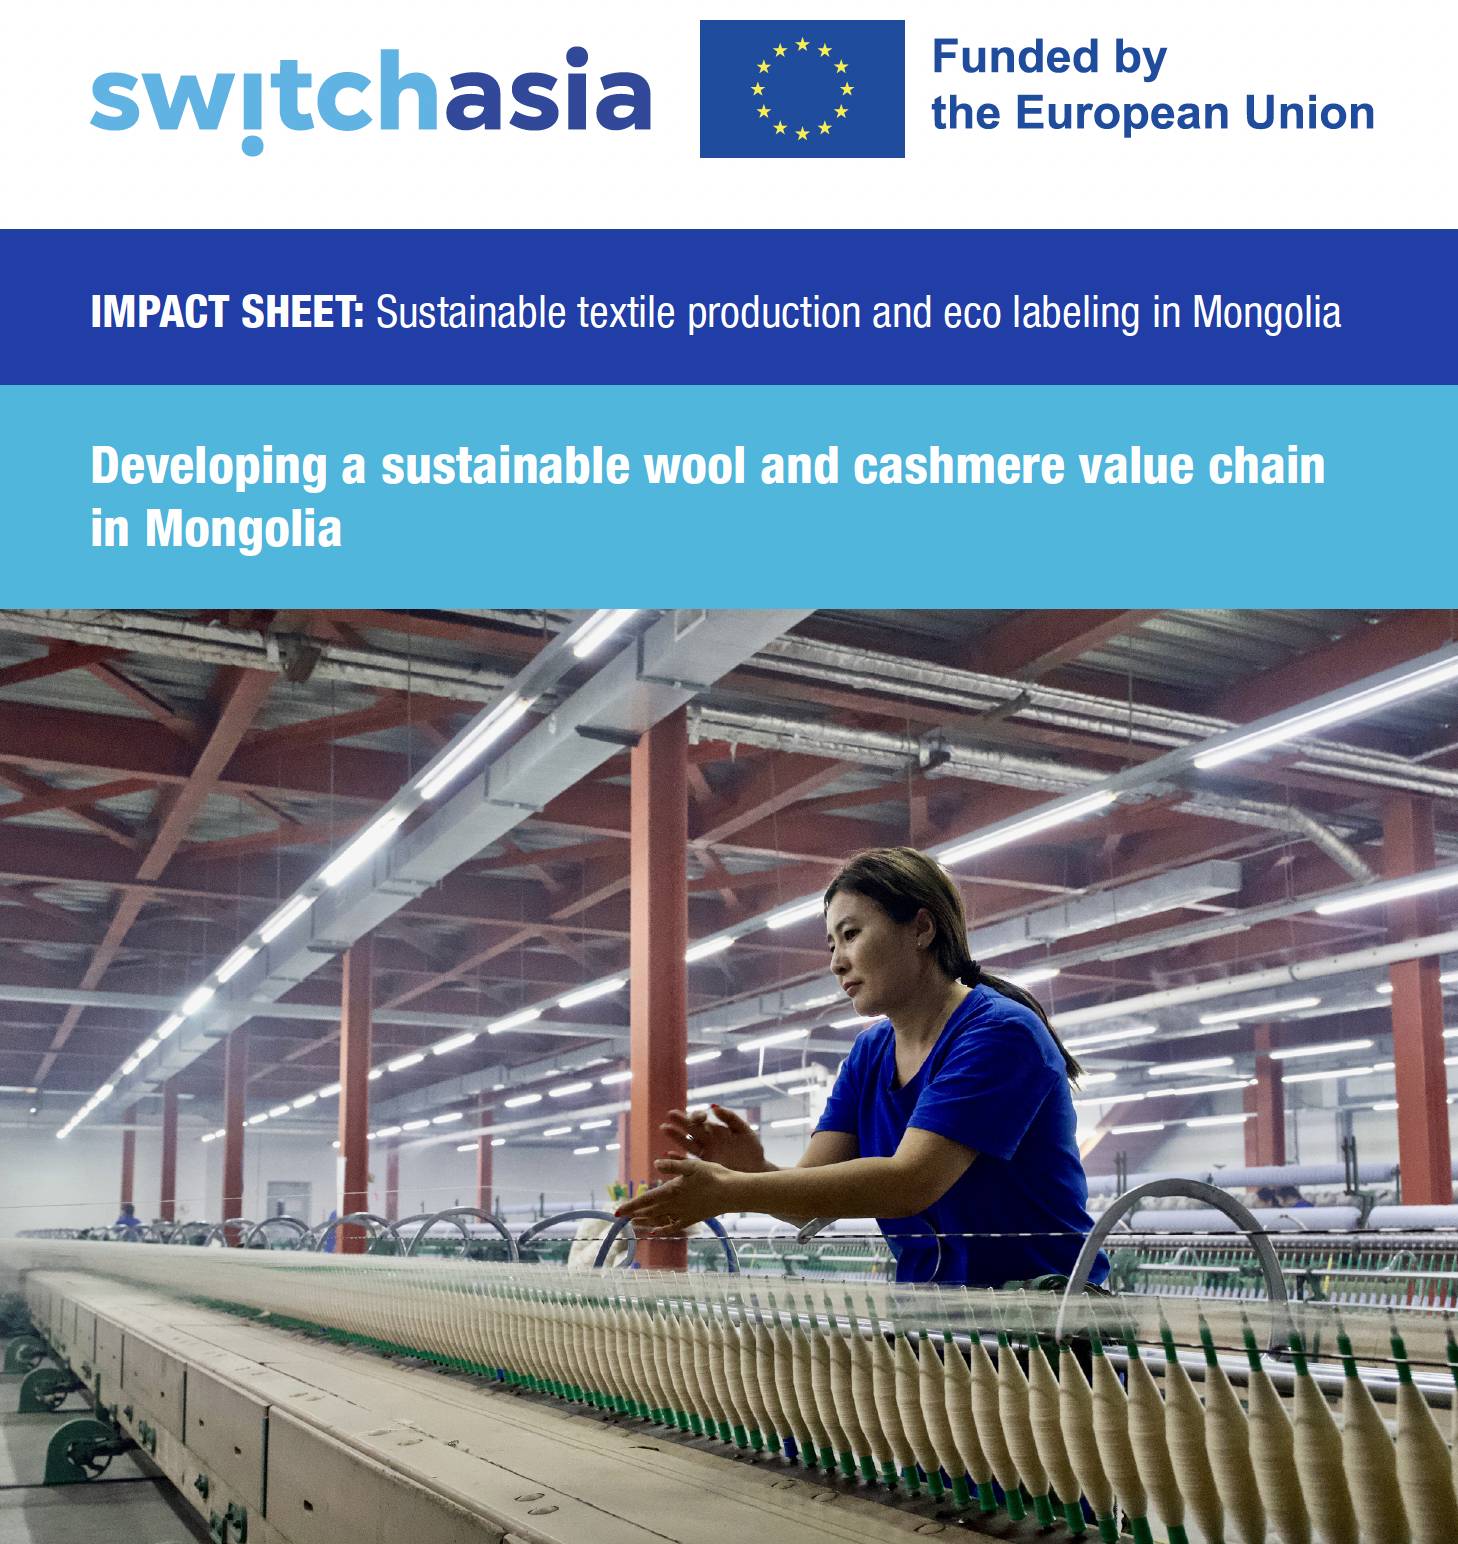 Impact Sheet: Sustainable textile production and eco labeling in Mongolia